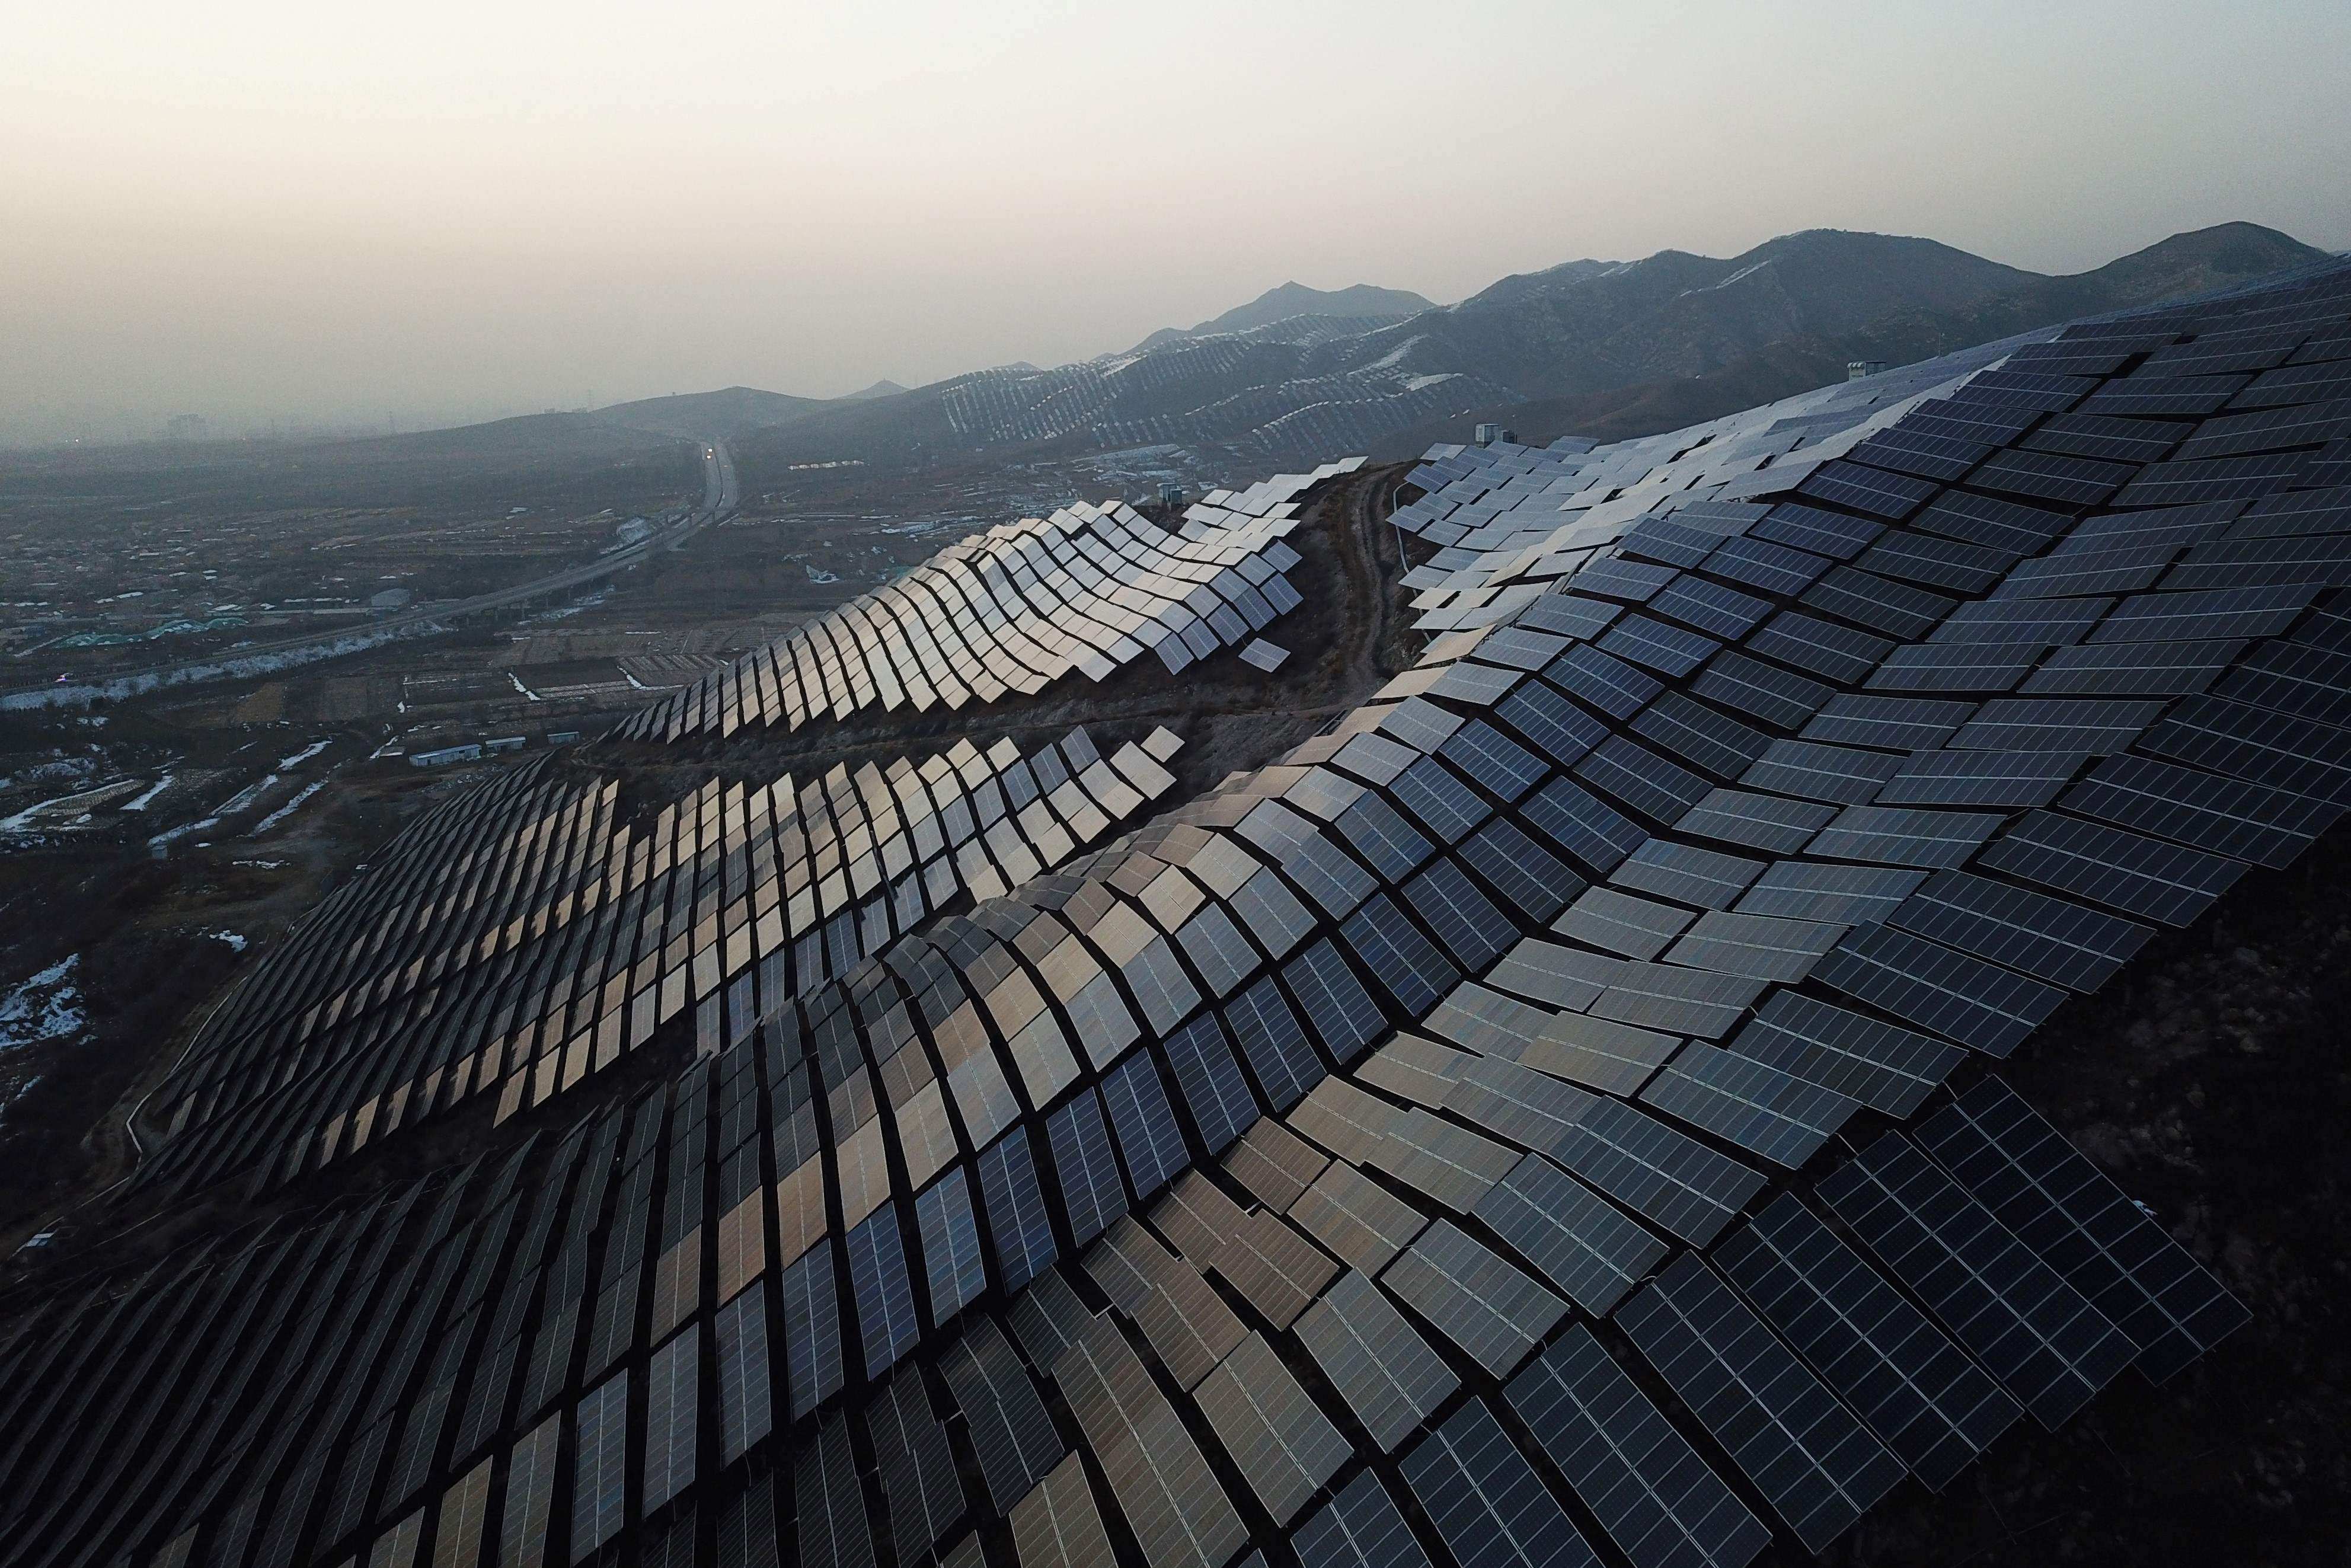 Solar panels are seen on hillsides at Xuanhua in Zhangjiakou, in China’s northern Hebei province, in November 2021. China accounted for 33 per cent of the world’s renewable electricity supply in 2021. Photo: AFP